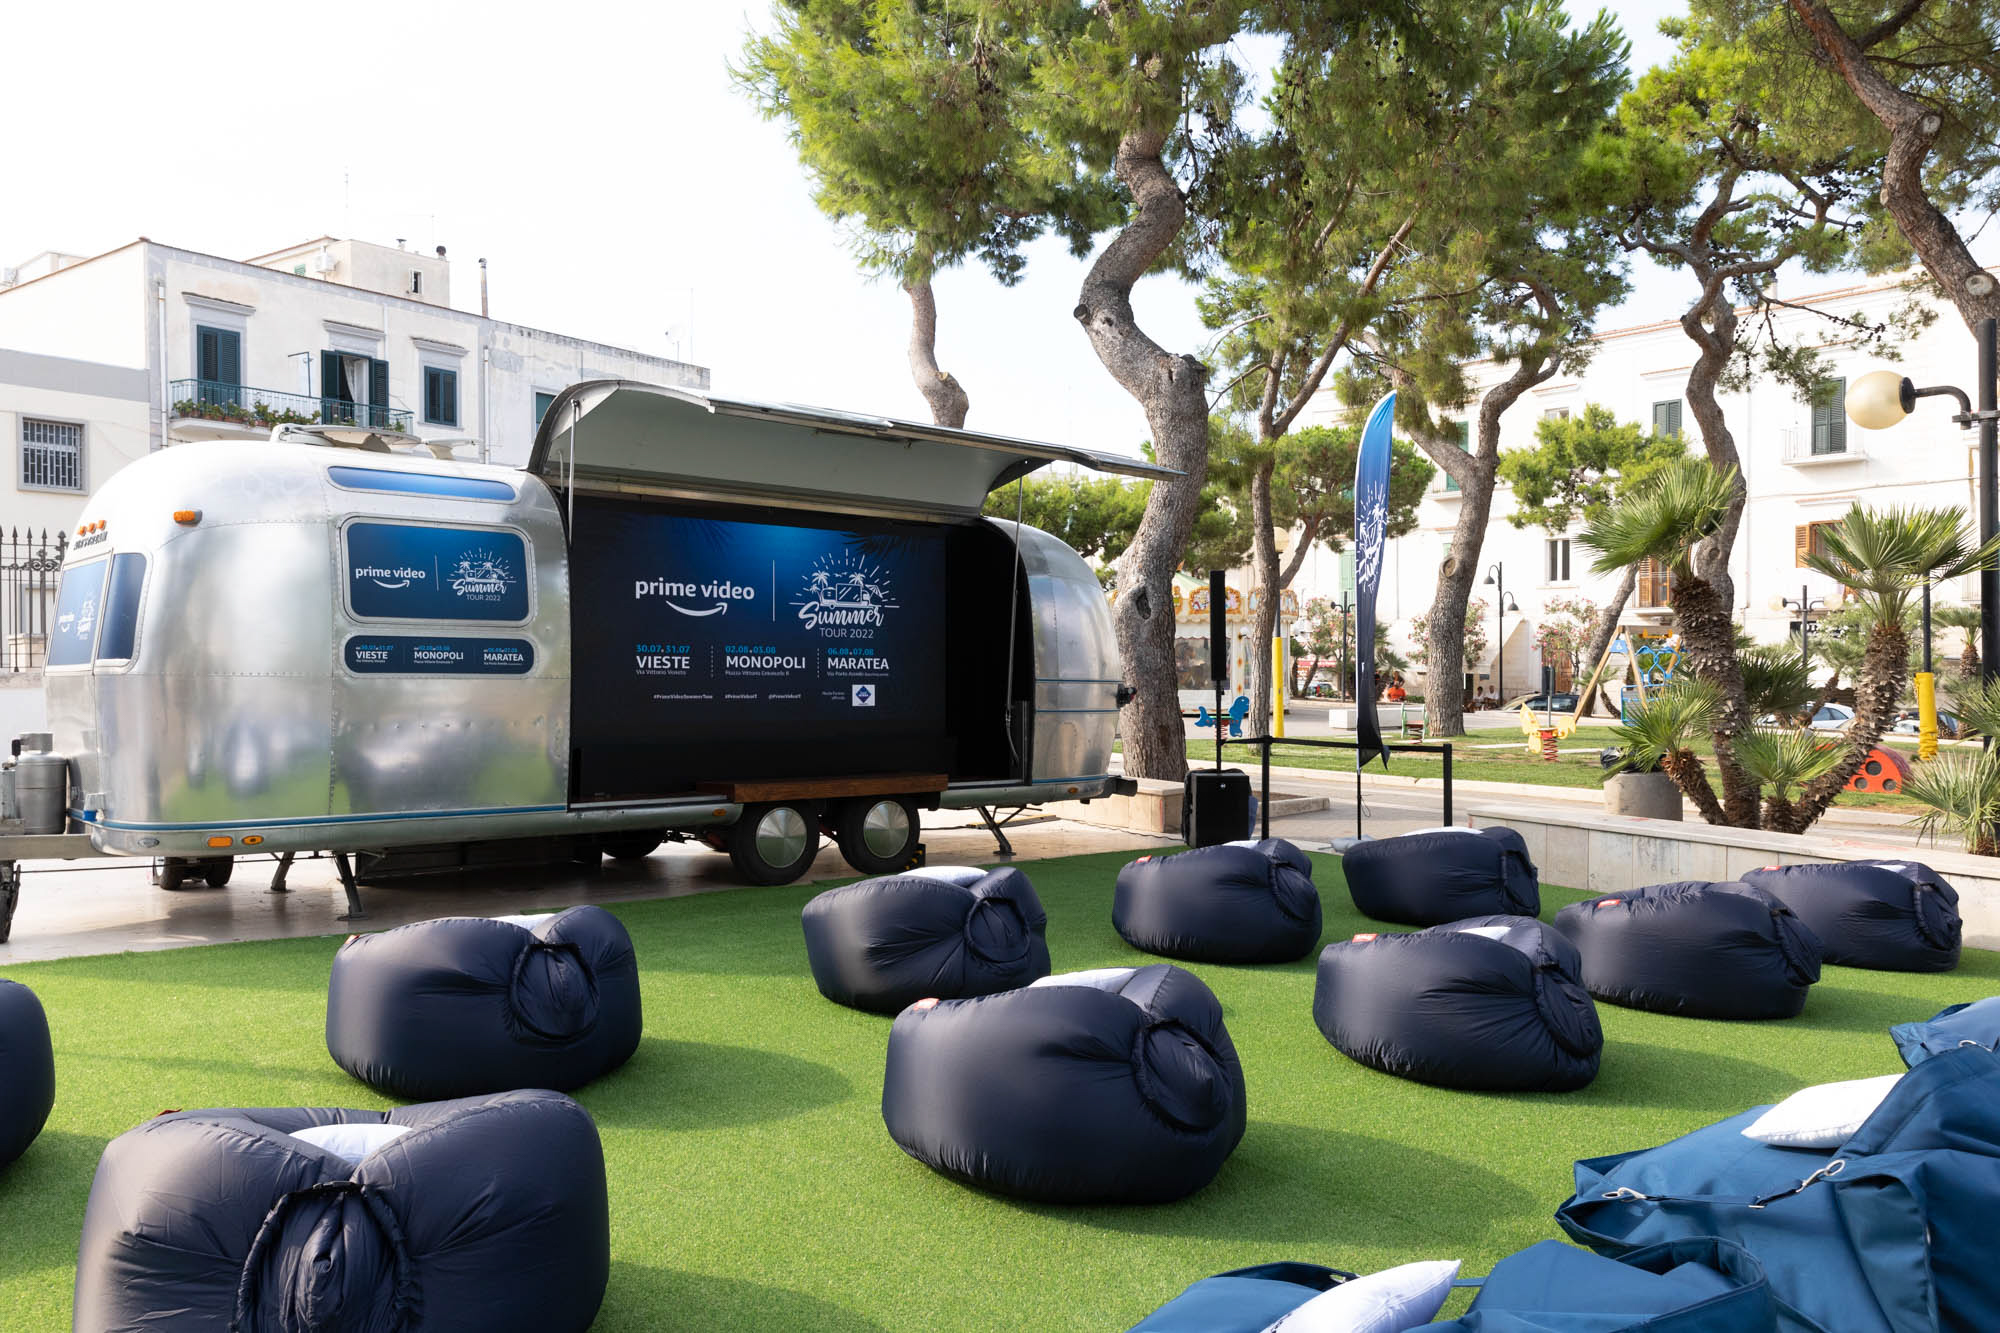 Open-air cinema tour with The B Agency and Prime Video in Vieste